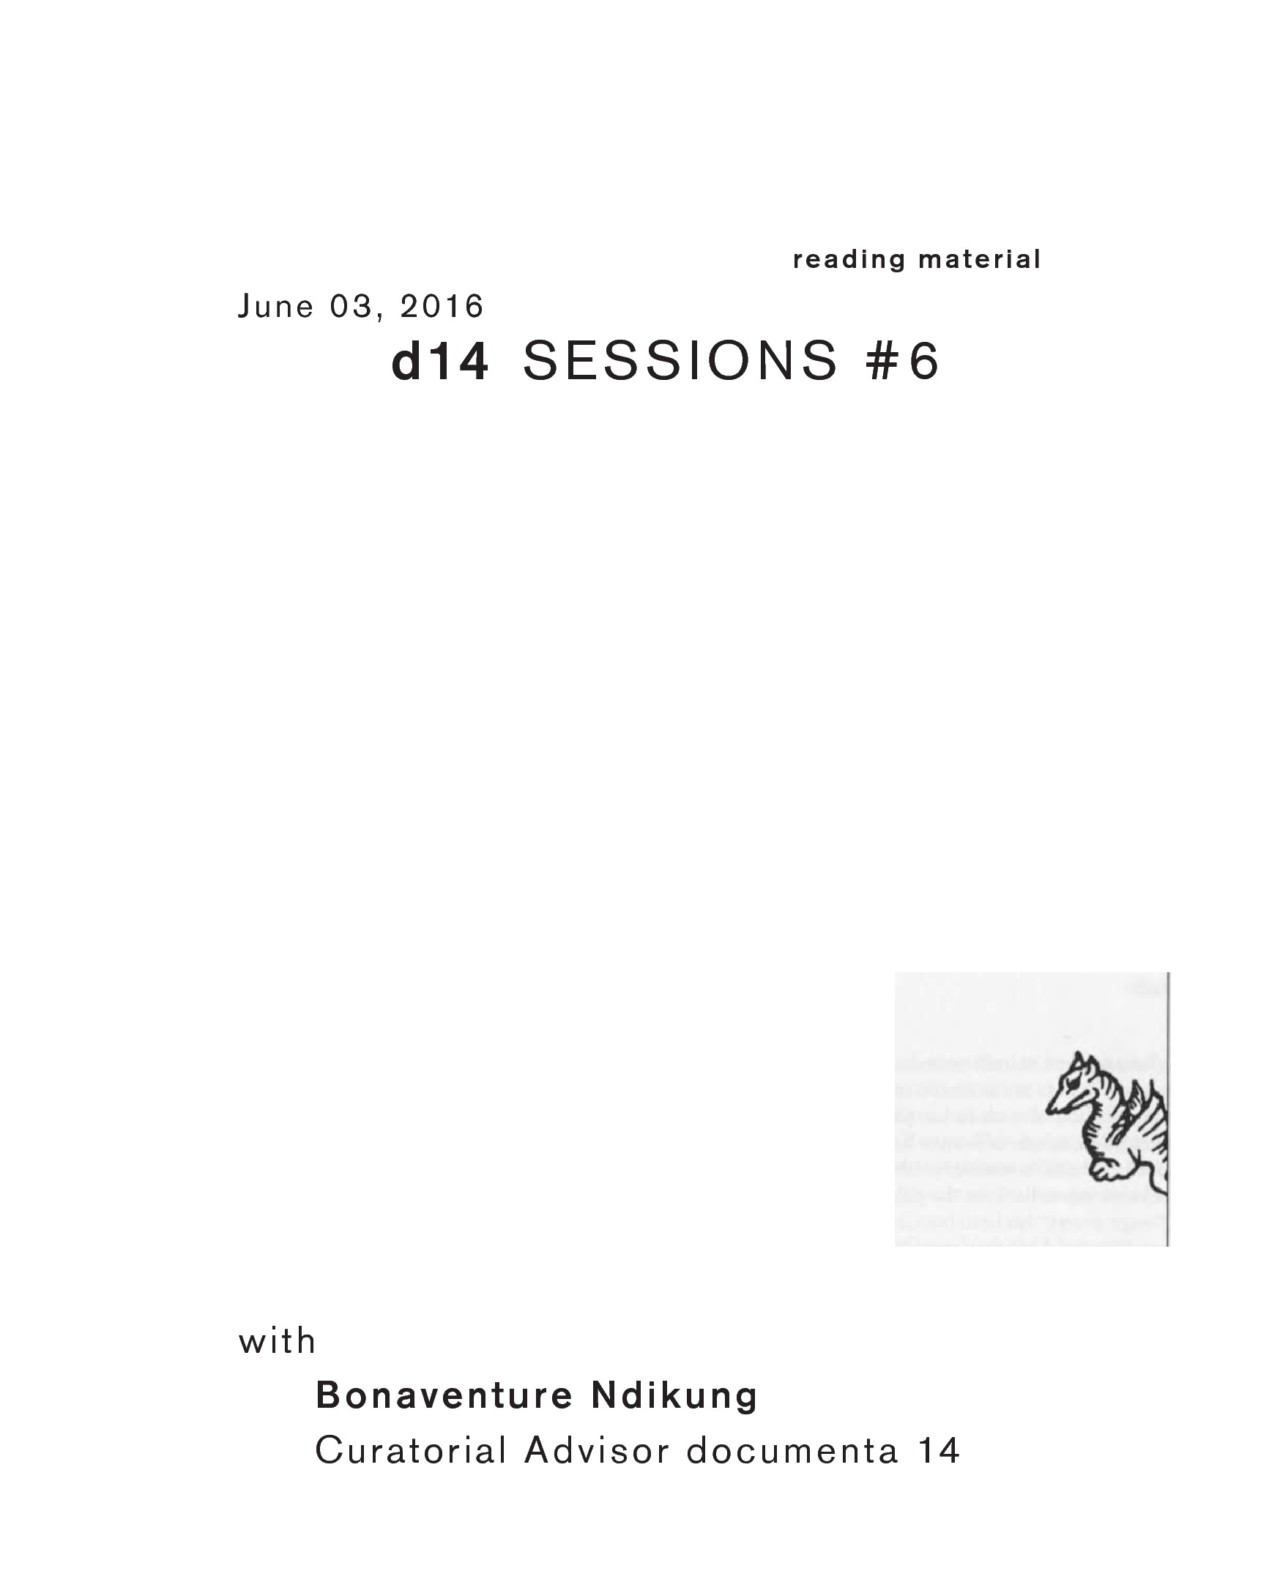 Membrane d14 SESSIONS #6 with Bonventure Ndikung, Curatorial Advisor d14